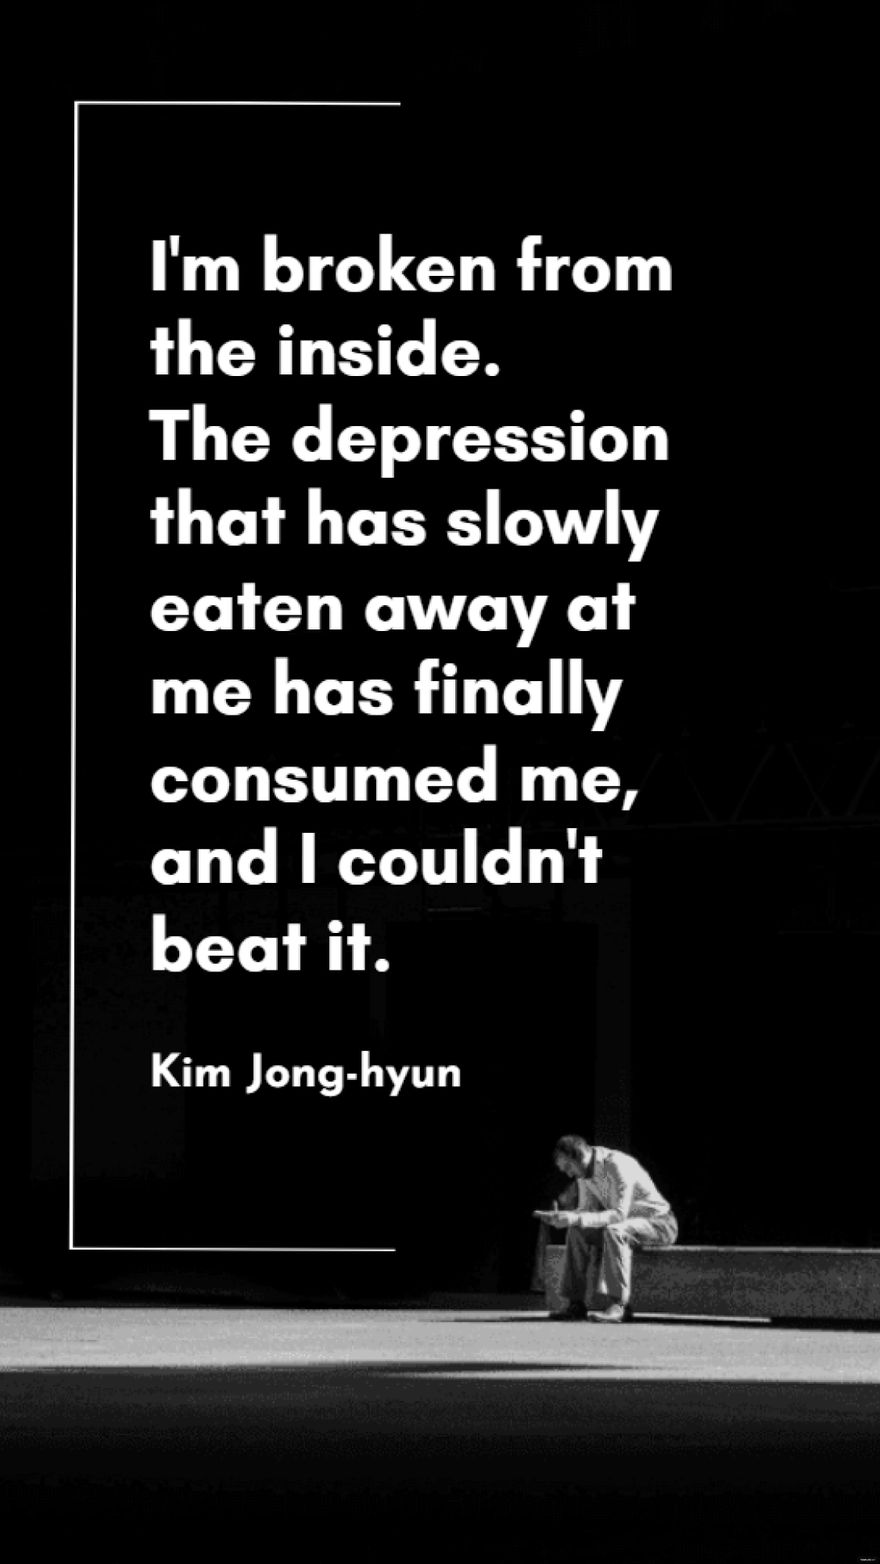 Kim Jonghyun  Im broken from the inside The depression that has slowly eaten away at me has finally consumed me and I couldnt beat it